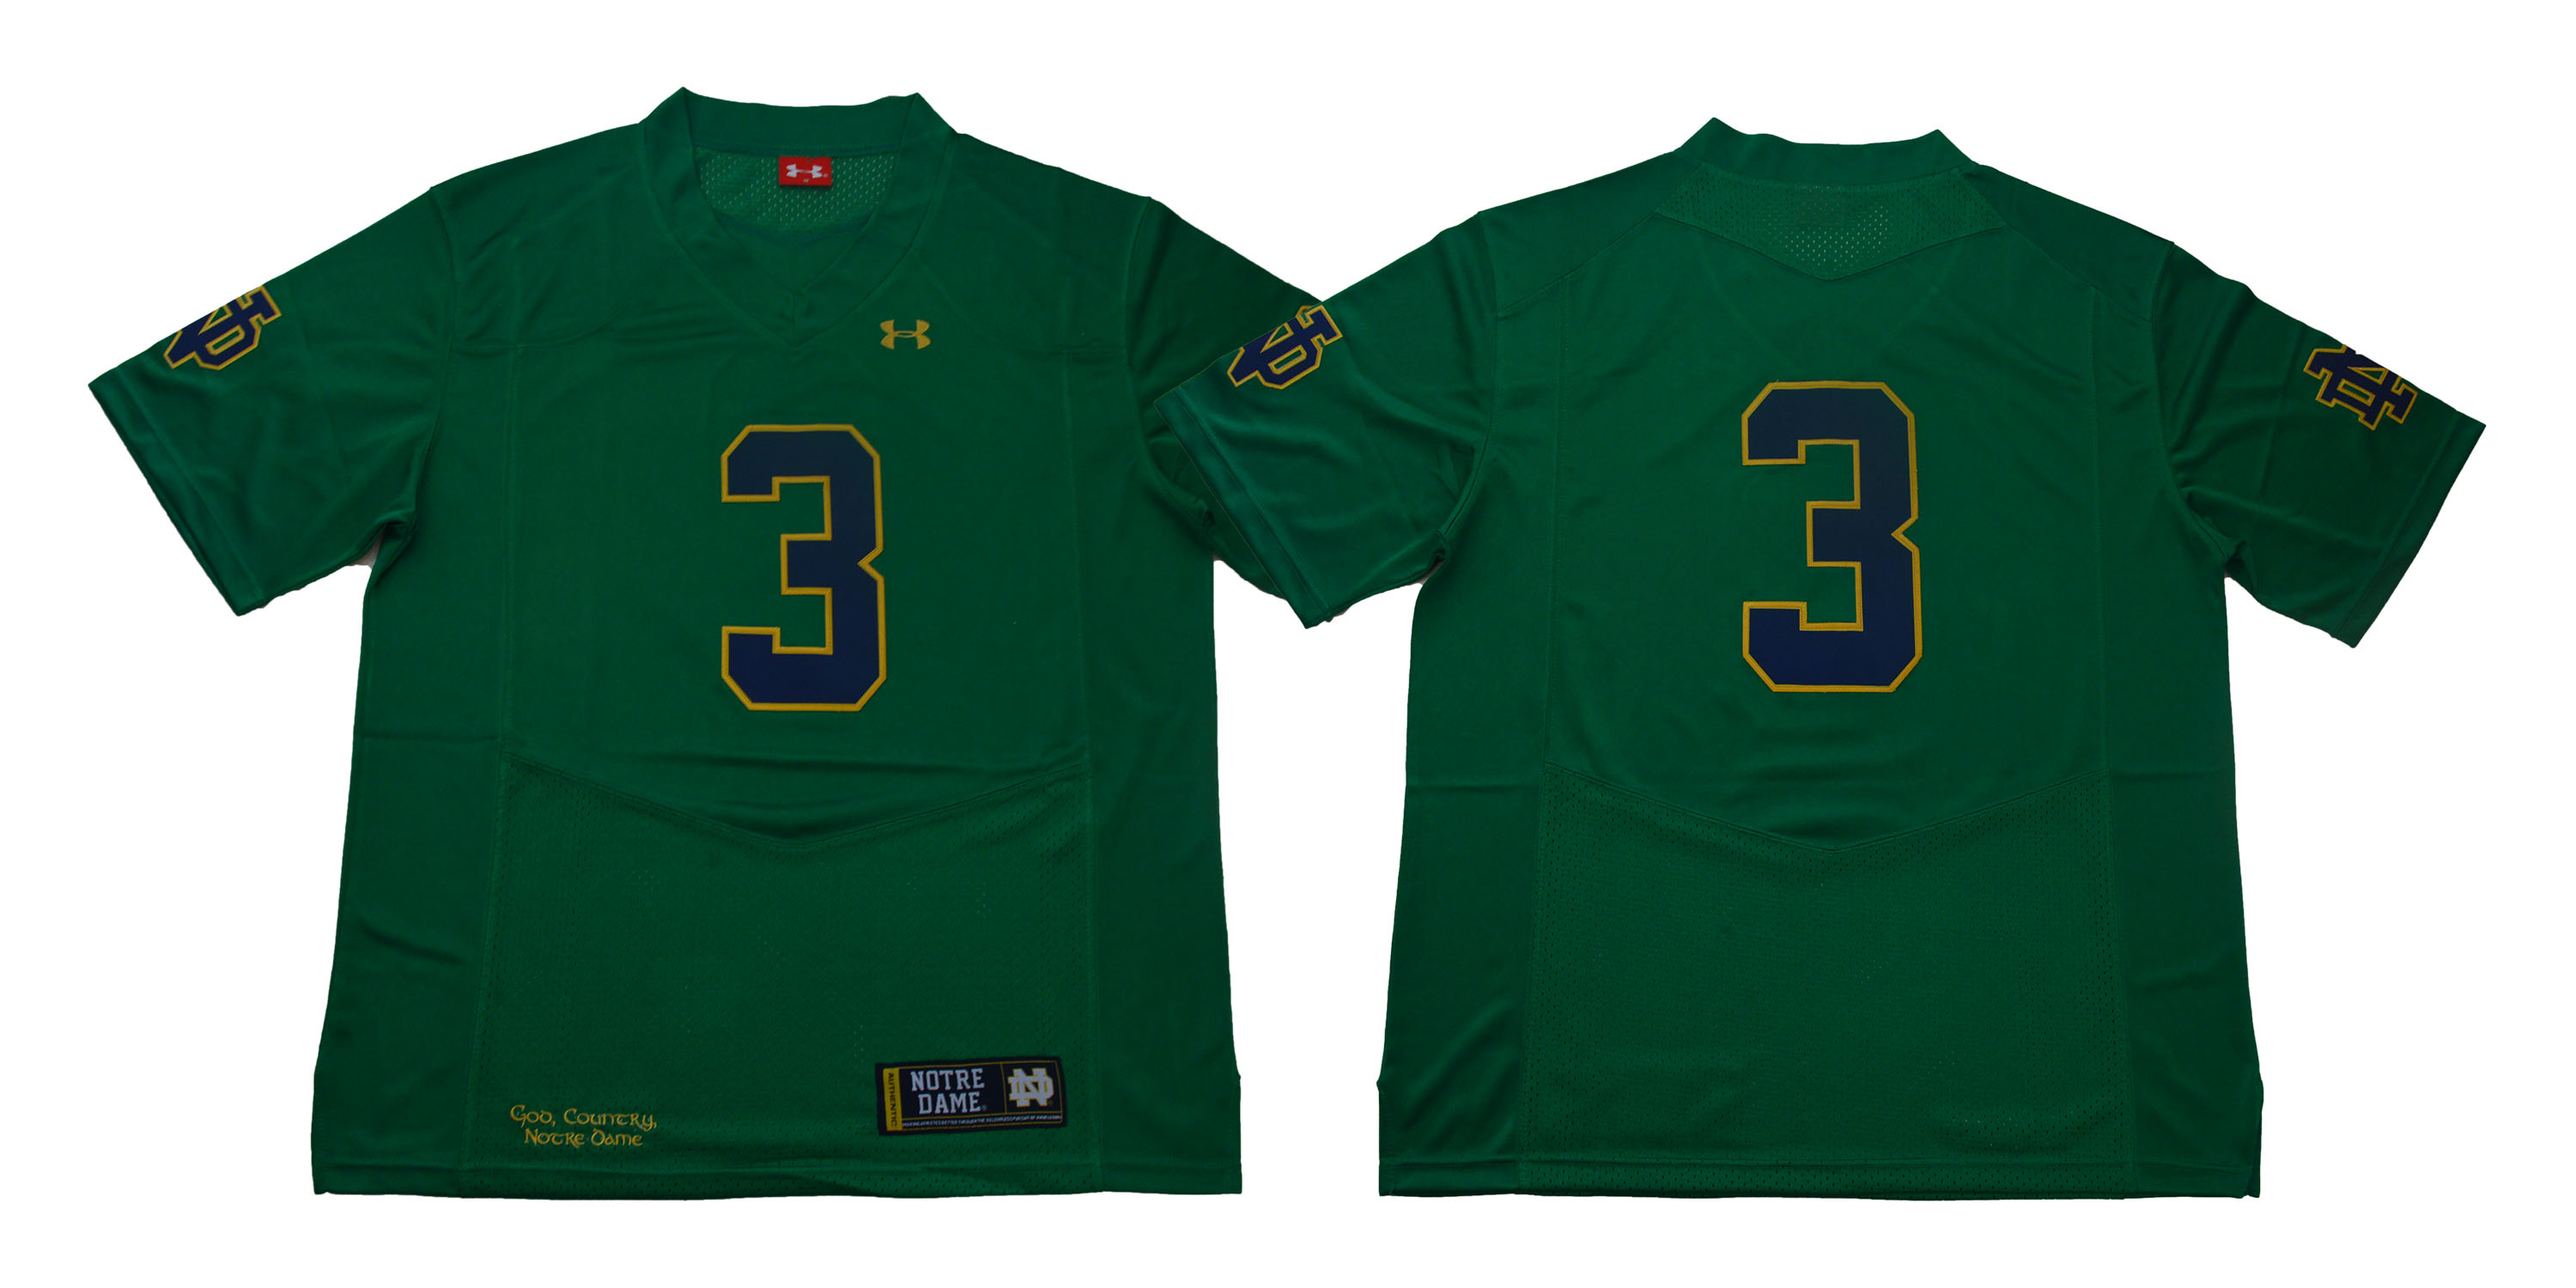 Notre Dame Fighting Irish #3 Green Under Armour College Football Jersey